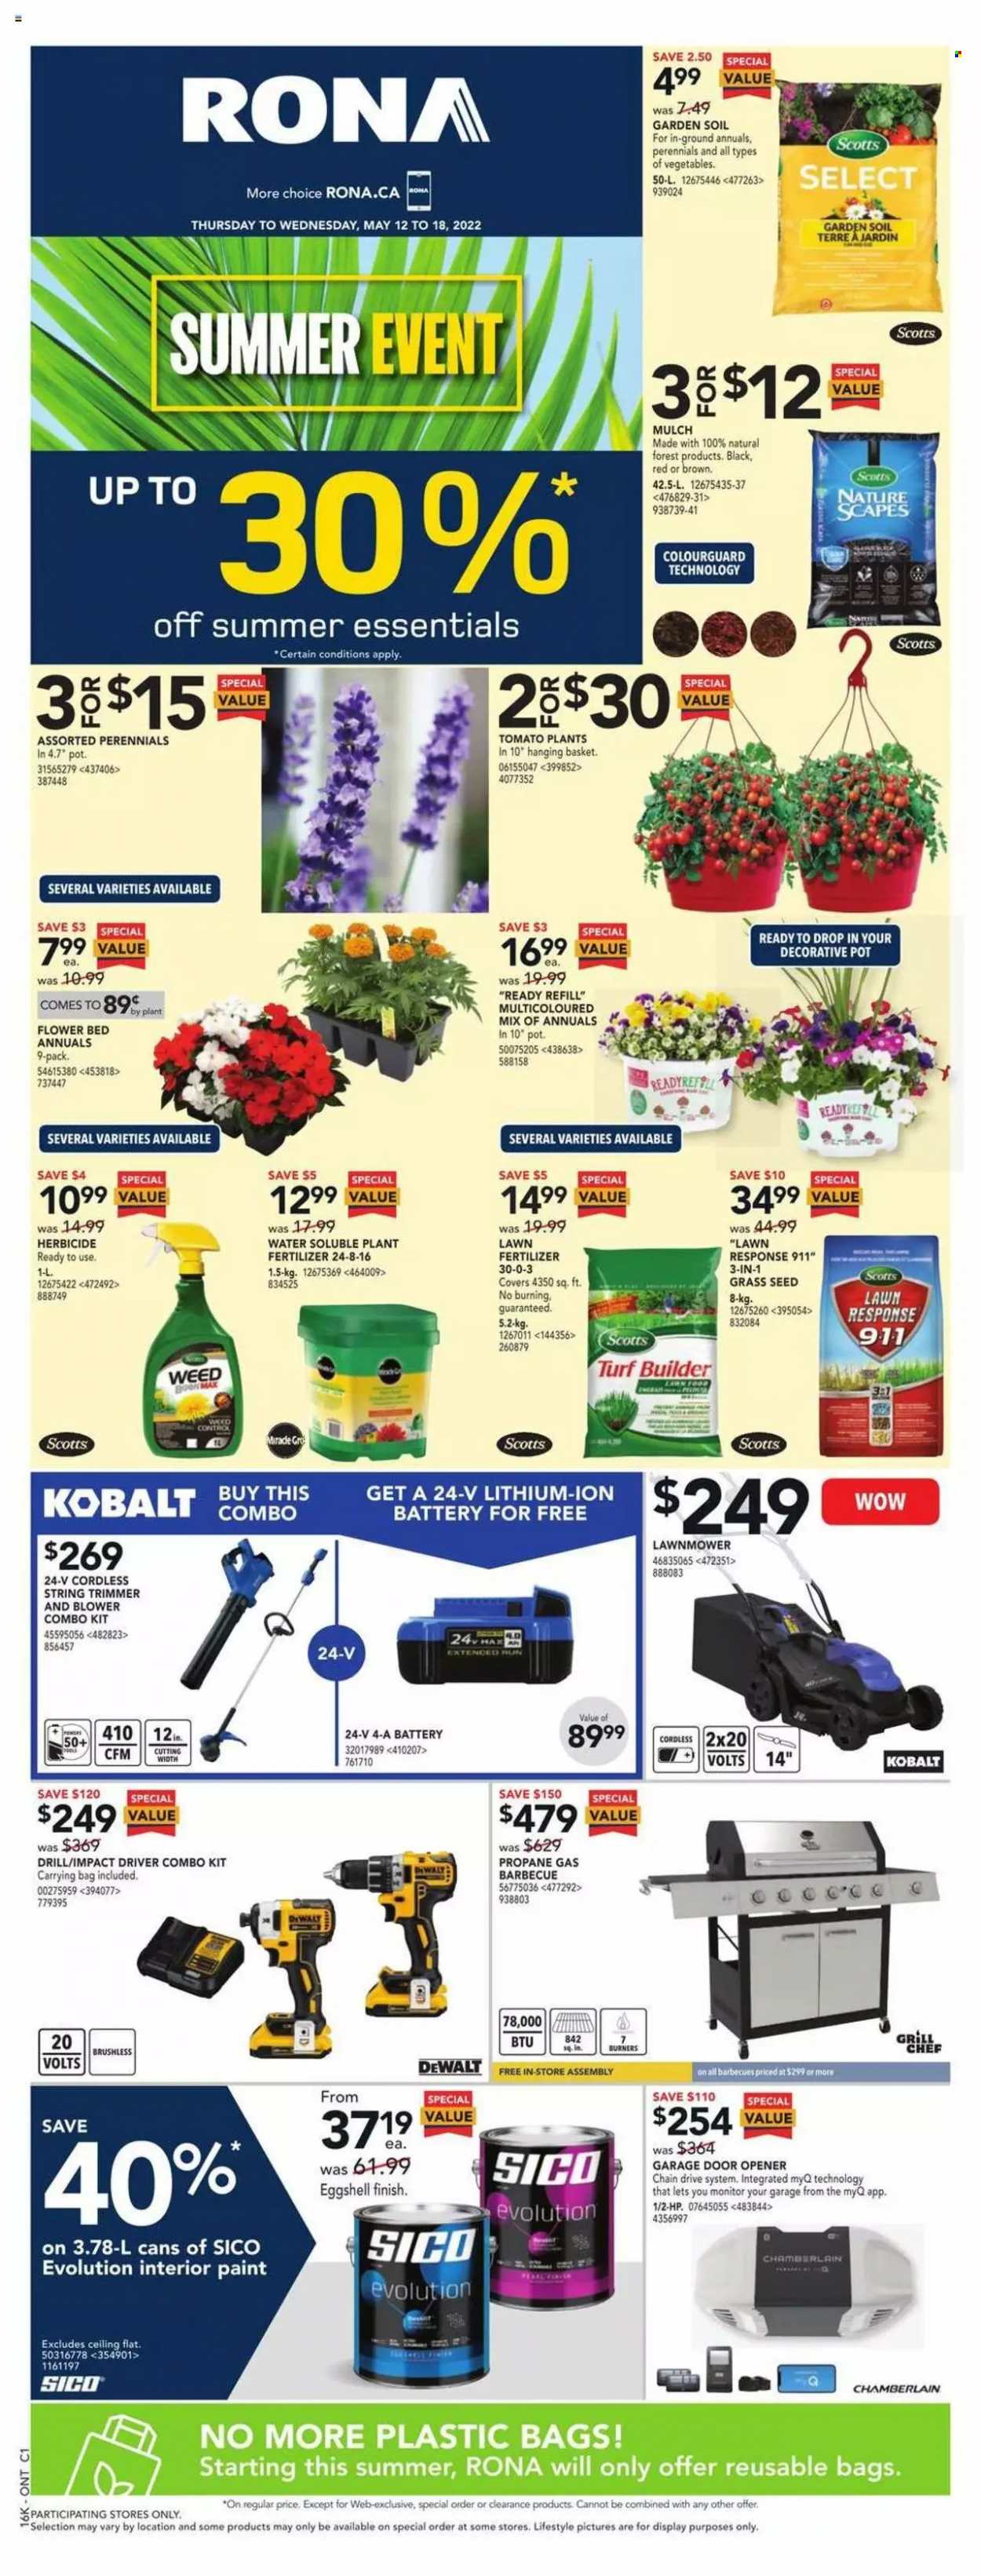 thumbnail - RONA Flyer - May 12, 2022 - May 18, 2022 - Sales products - basket, pot, trimmer, bed, paint, door opener, garage door opener, DeWALT, drill, impact driver, string trimmer, lawn mower, combo kit, grill, plant seeds, fertilizer, turf builder, garden soil, grass seed, garden mulch. Page 1.